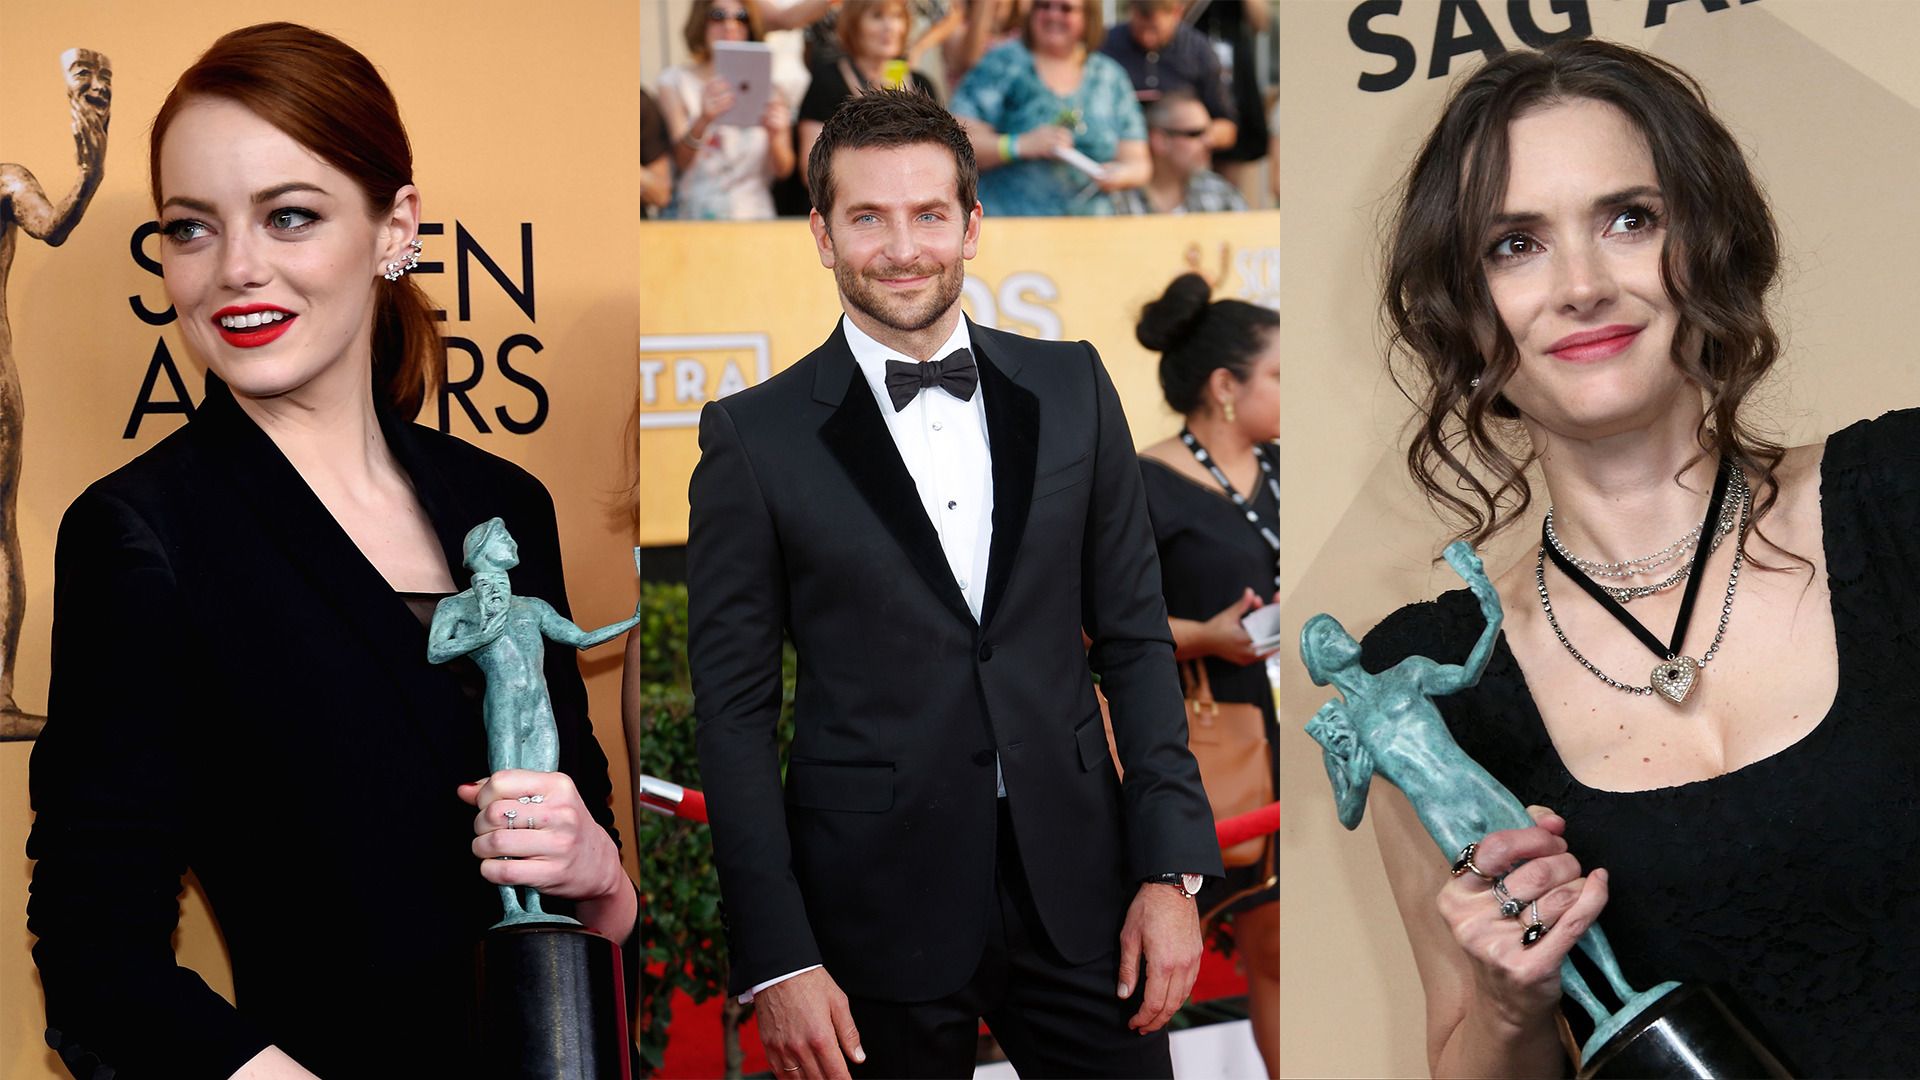 The SAG Awards' 7 most awkward moments, from Bradley Cooper's prank to Winona Ryder's 'facegate'